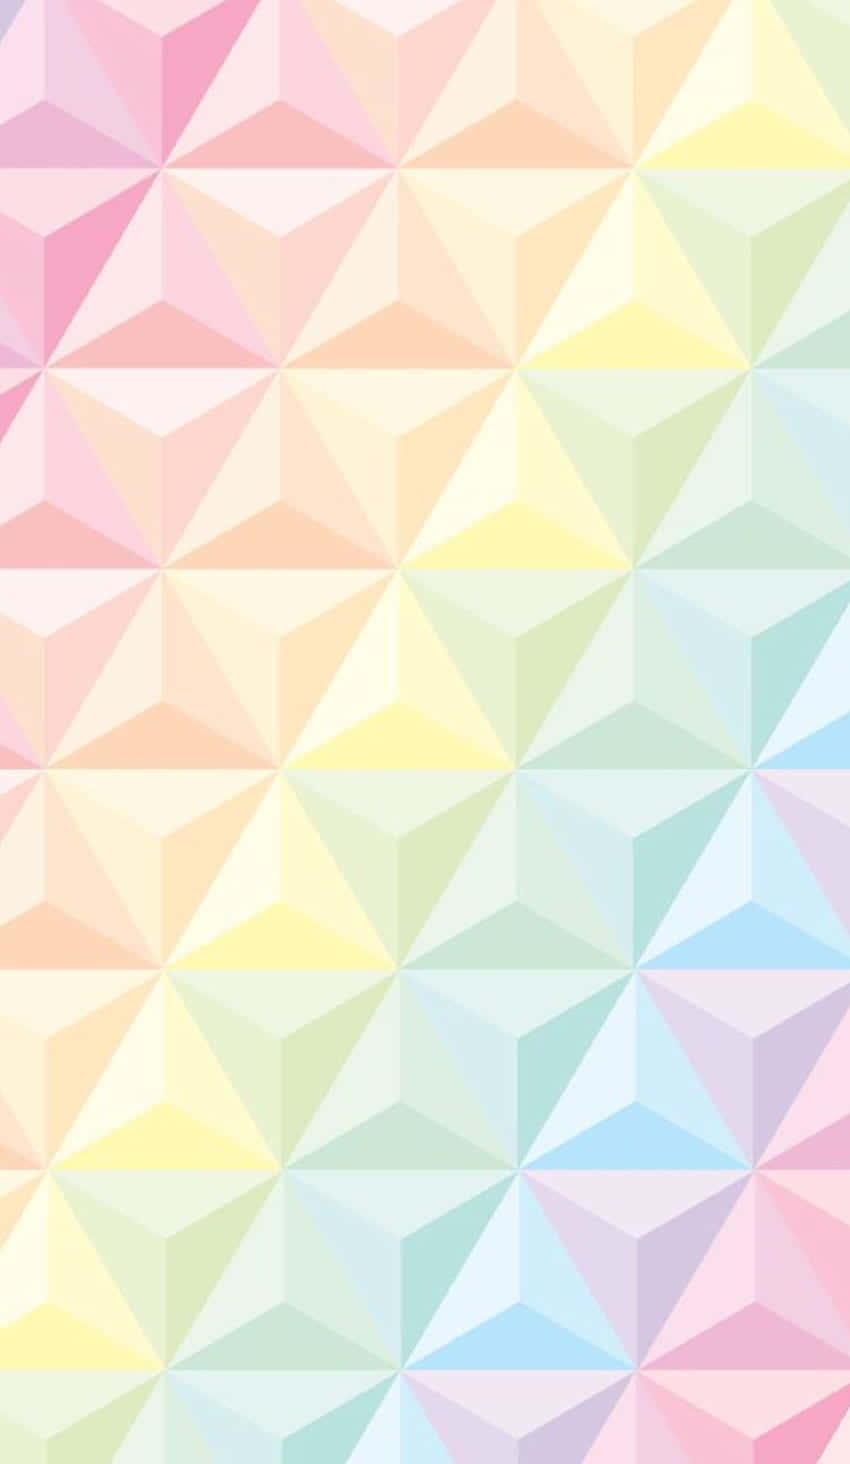 A Colorful Geometric Background With Triangles